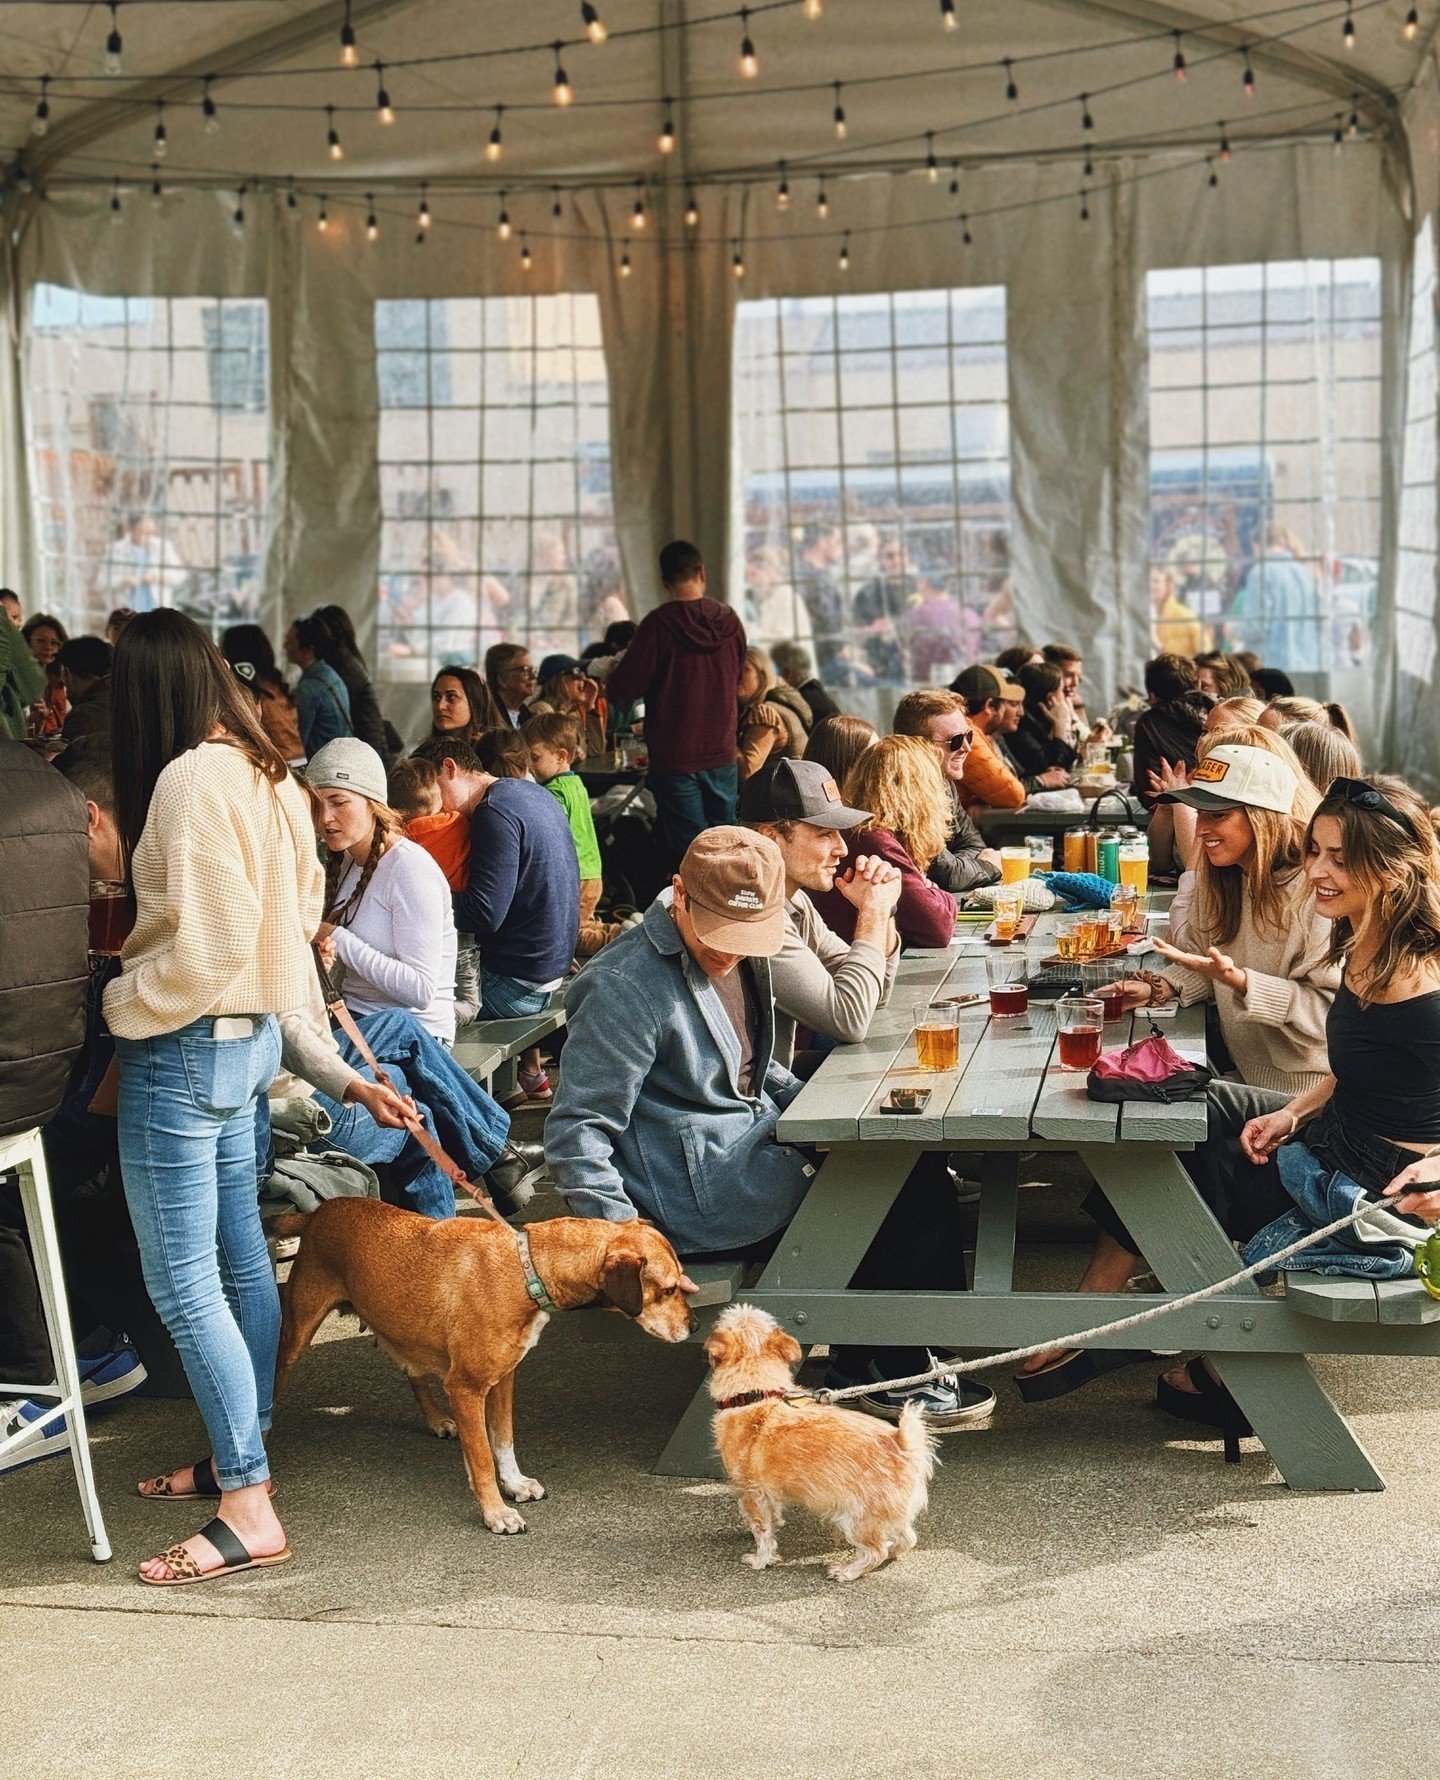 Good vibes only at our taproom - where every friend is welcome, furry or not! Bring your squad, bring your pup, and enjoy some delicious cider! 🐶✨️⁠
⁠
⁠
⁠
⁠⁠#taproomvibes #yondercider #drinkyonder #borntoroam #illbeoveryonder #ballard #thebbyctaproo